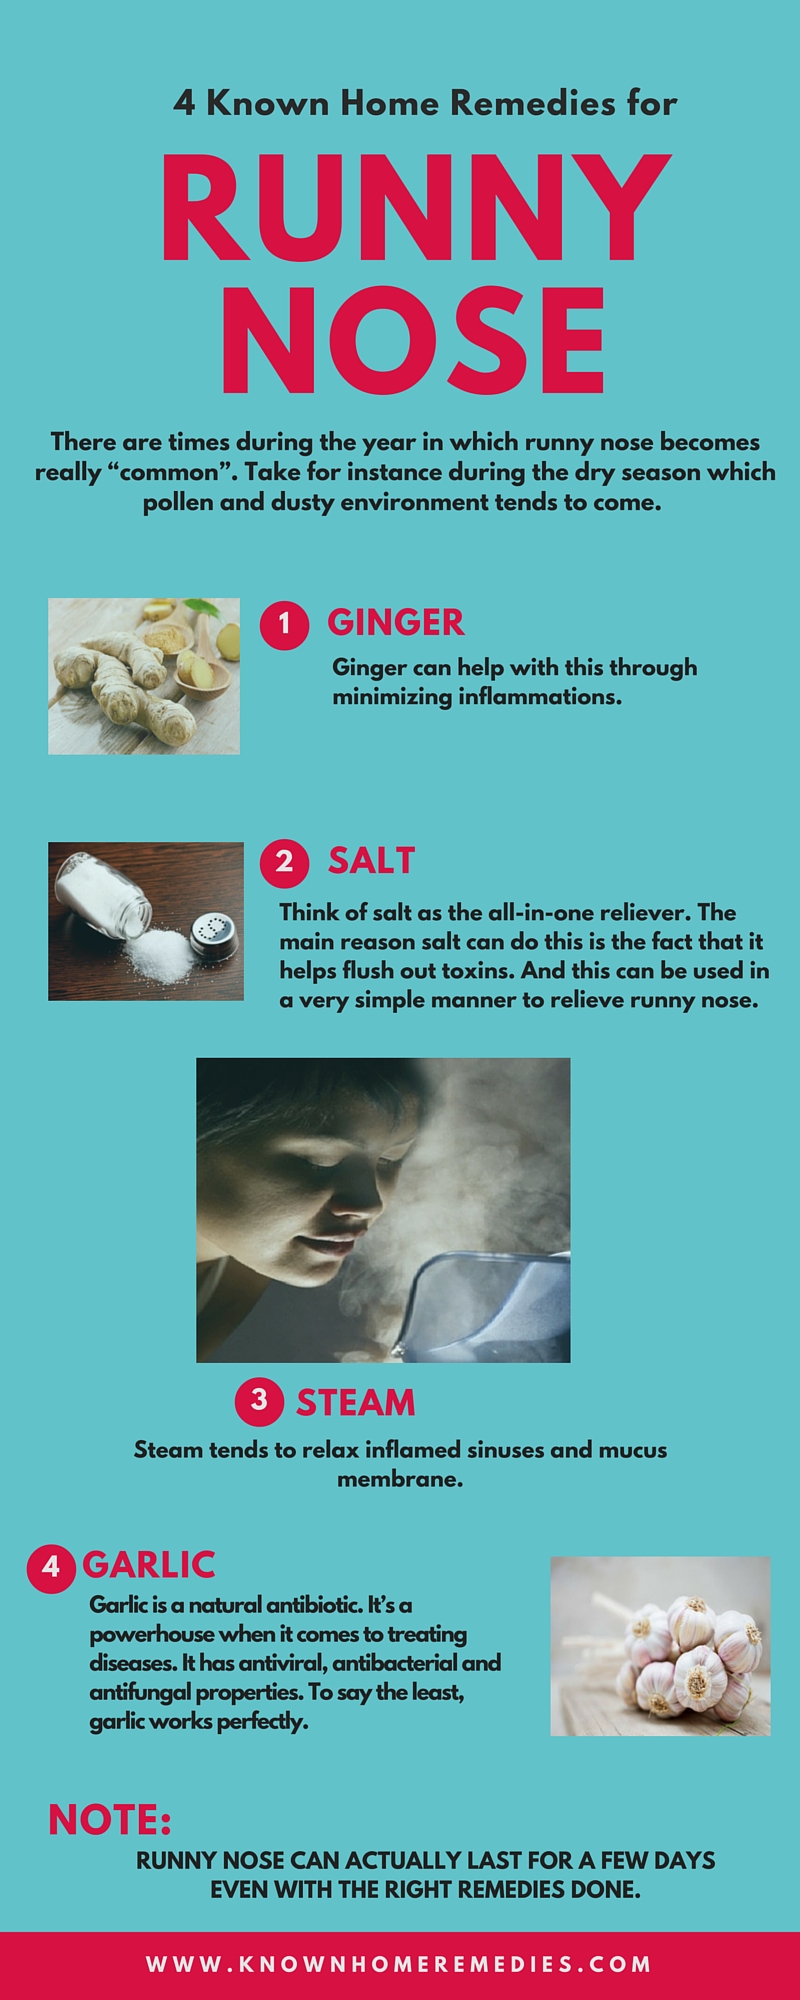 4-known-home-remedies-for-runny-nose-visual-ly